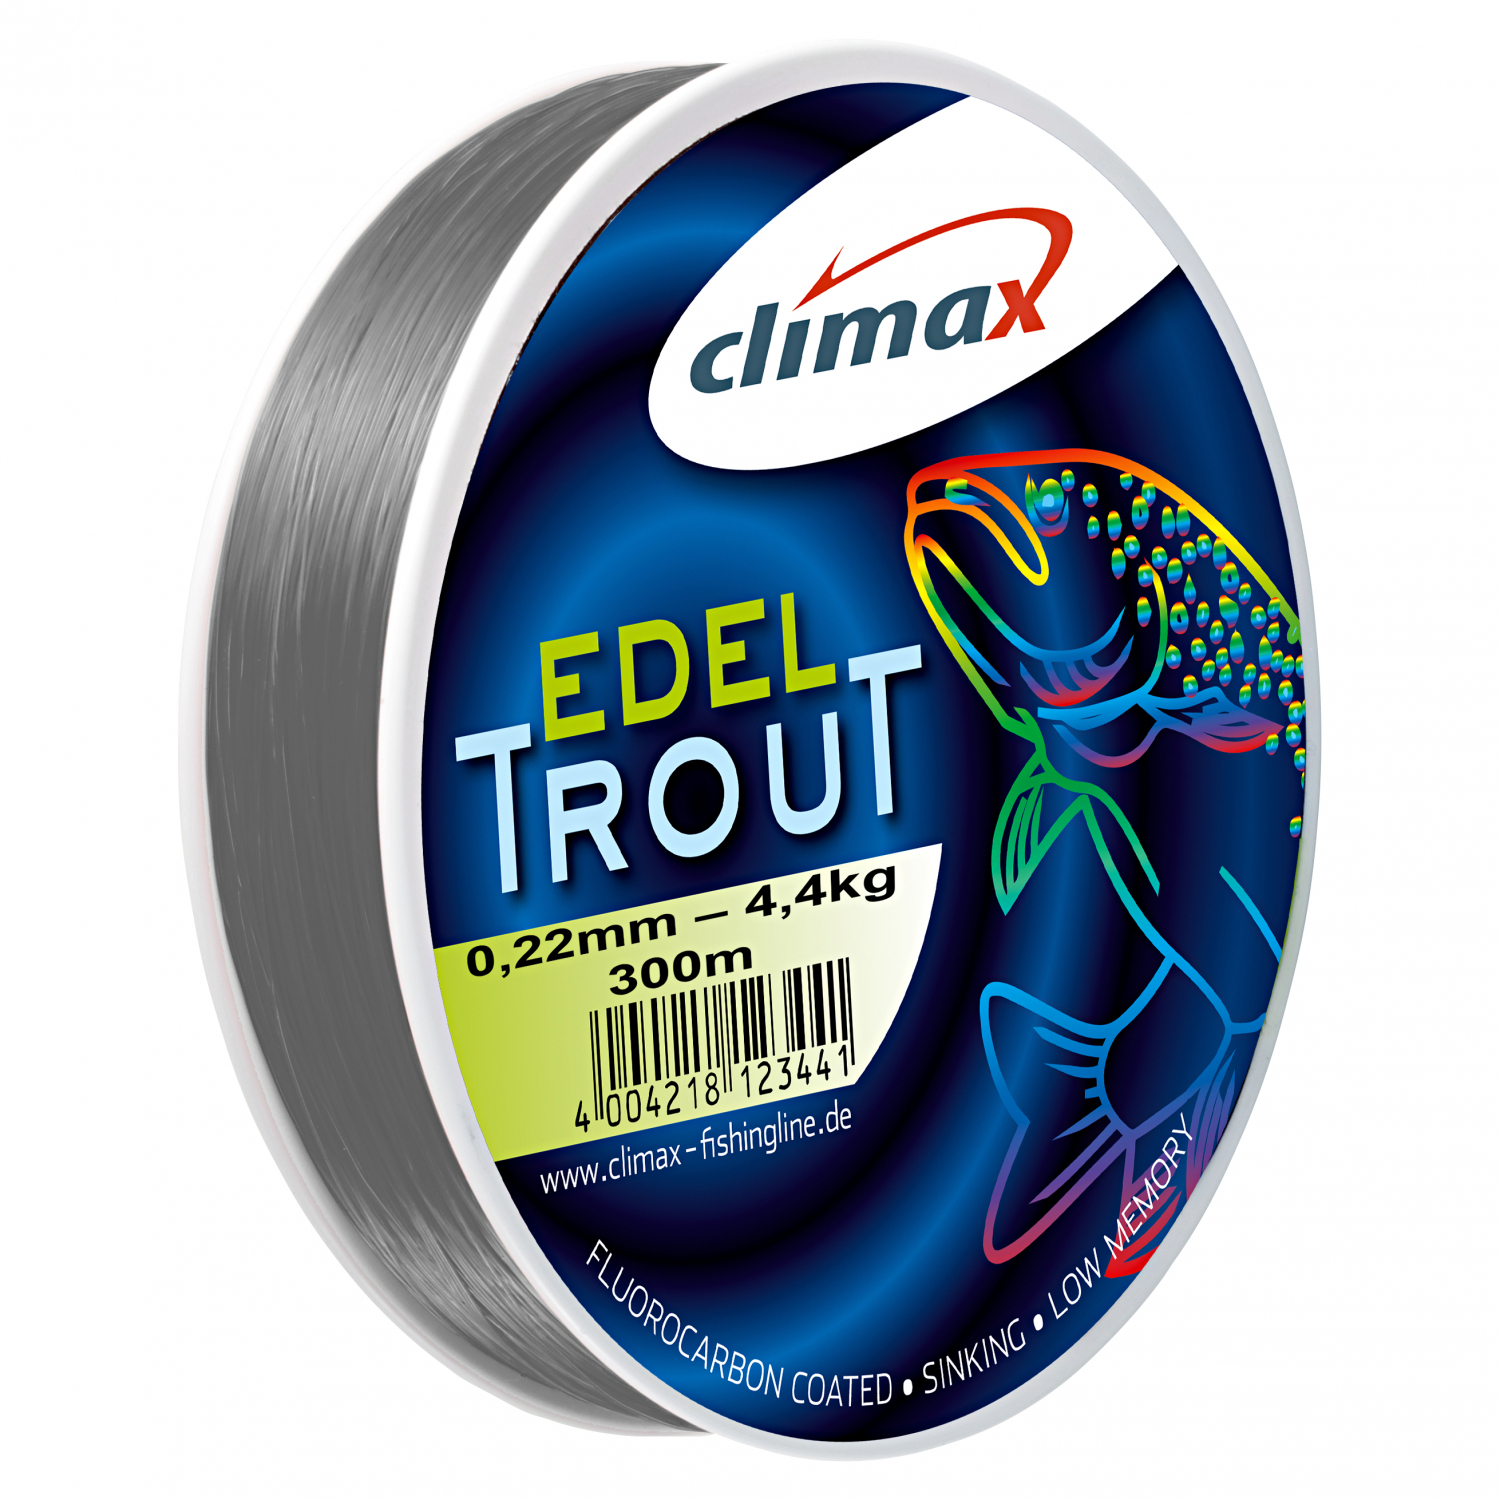 Climax Fishing Line Edel-Trout (silver grey, 300 m) at low prices